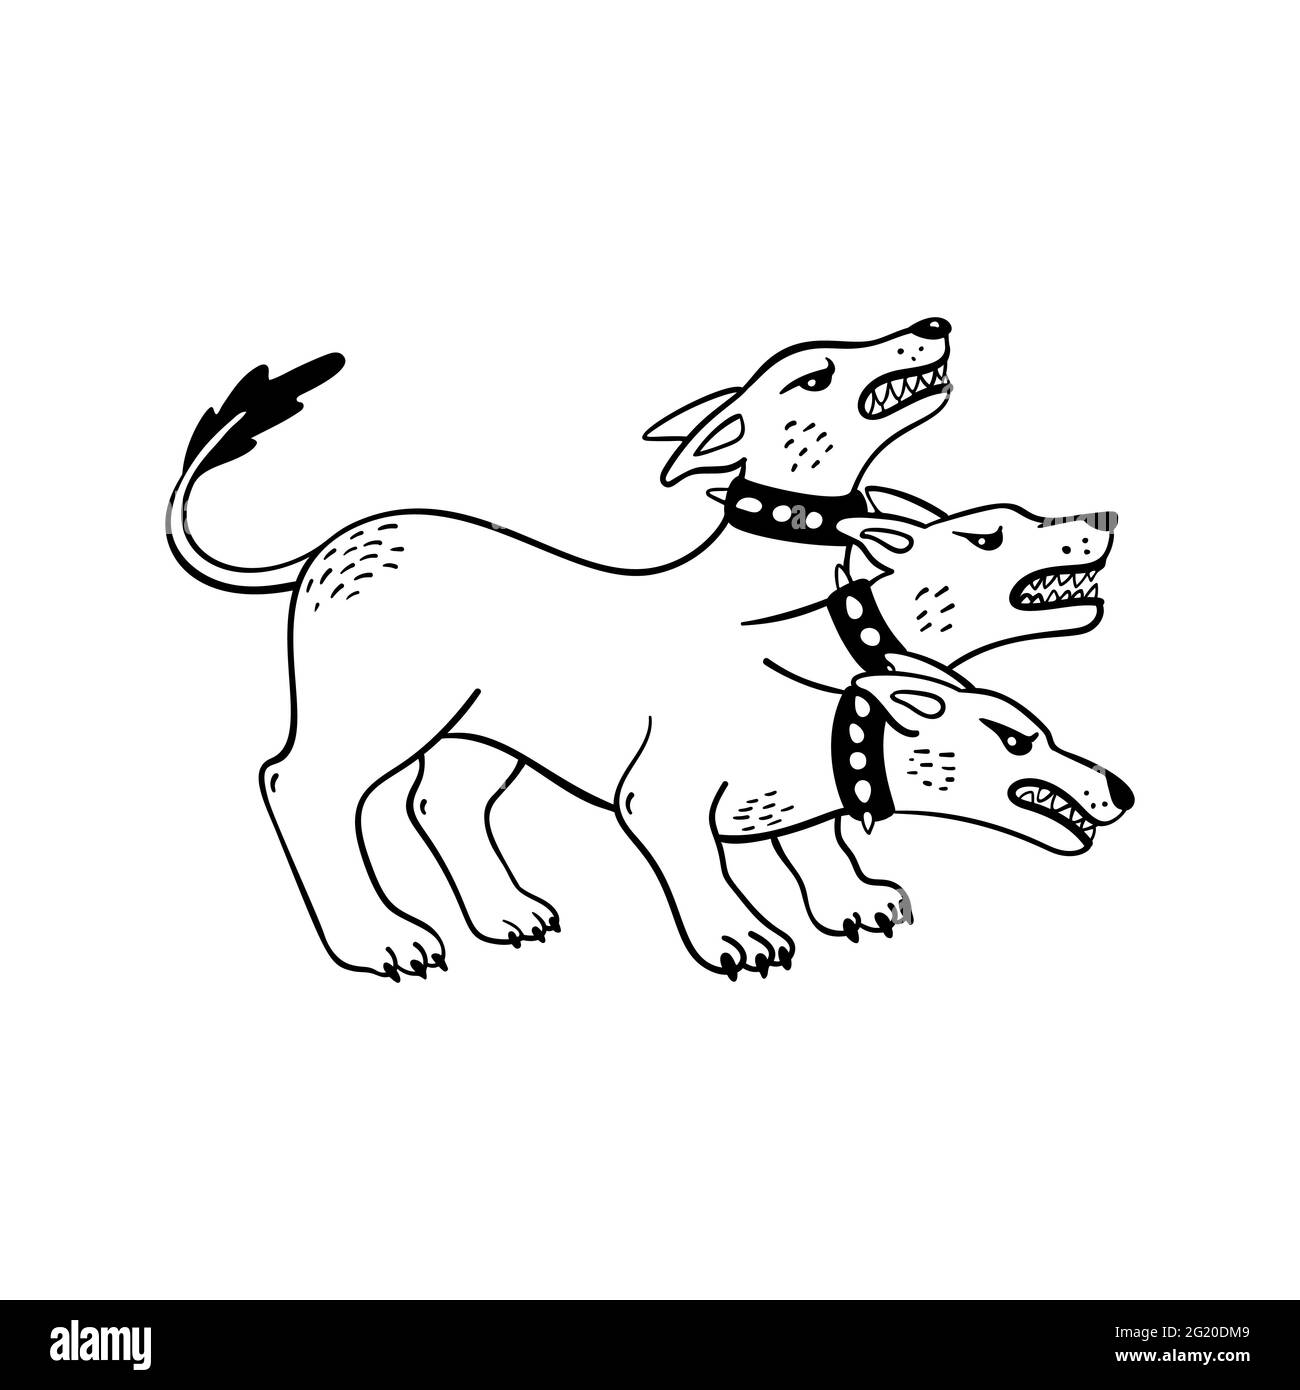 Magical creatures set. Mythological animal - cerberus. Doodle style black and white vector illustration isolated on white background. Tattoo design or Stock Vector